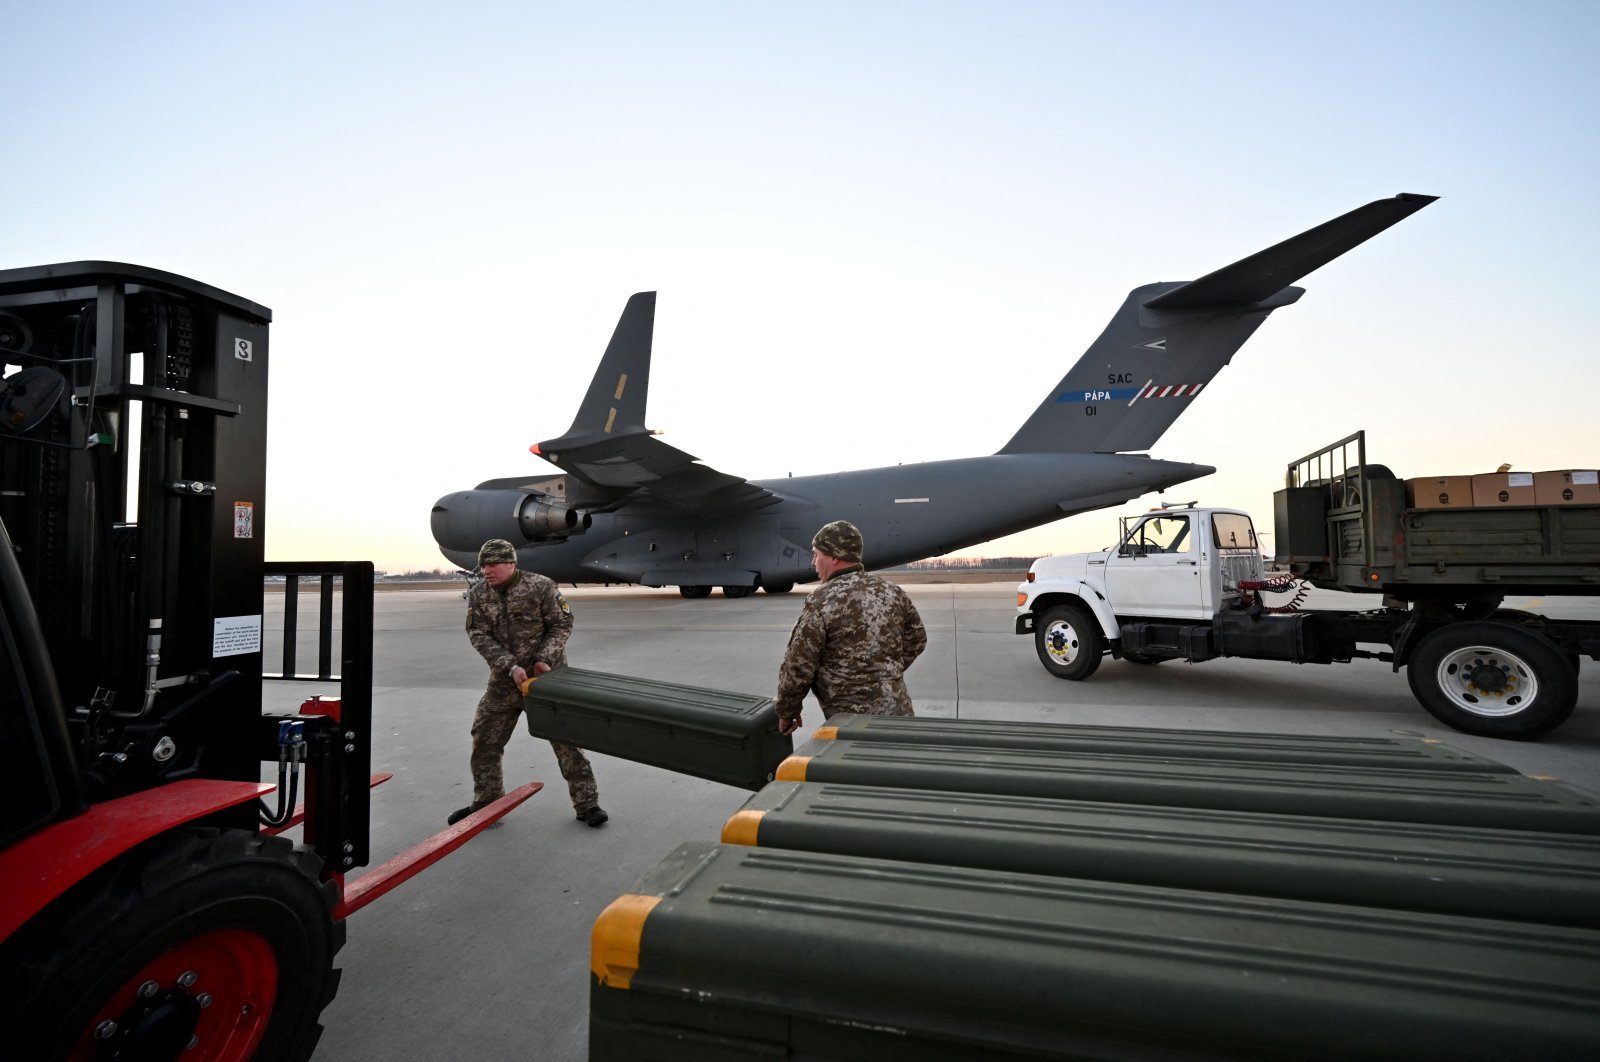 Servicemen of Ukrainian Military Forces move U.S.-made FIM-92 Stinger missiles, a man-portable air-defense system (MANPADS), that operates as an infrared homing surface-to-air missile (SAM), and the other military assistance shipped from Lithuania to Boryspil Airport in Kyiv, Ukraine, Feb. 13, 2022. (AFP Photo)